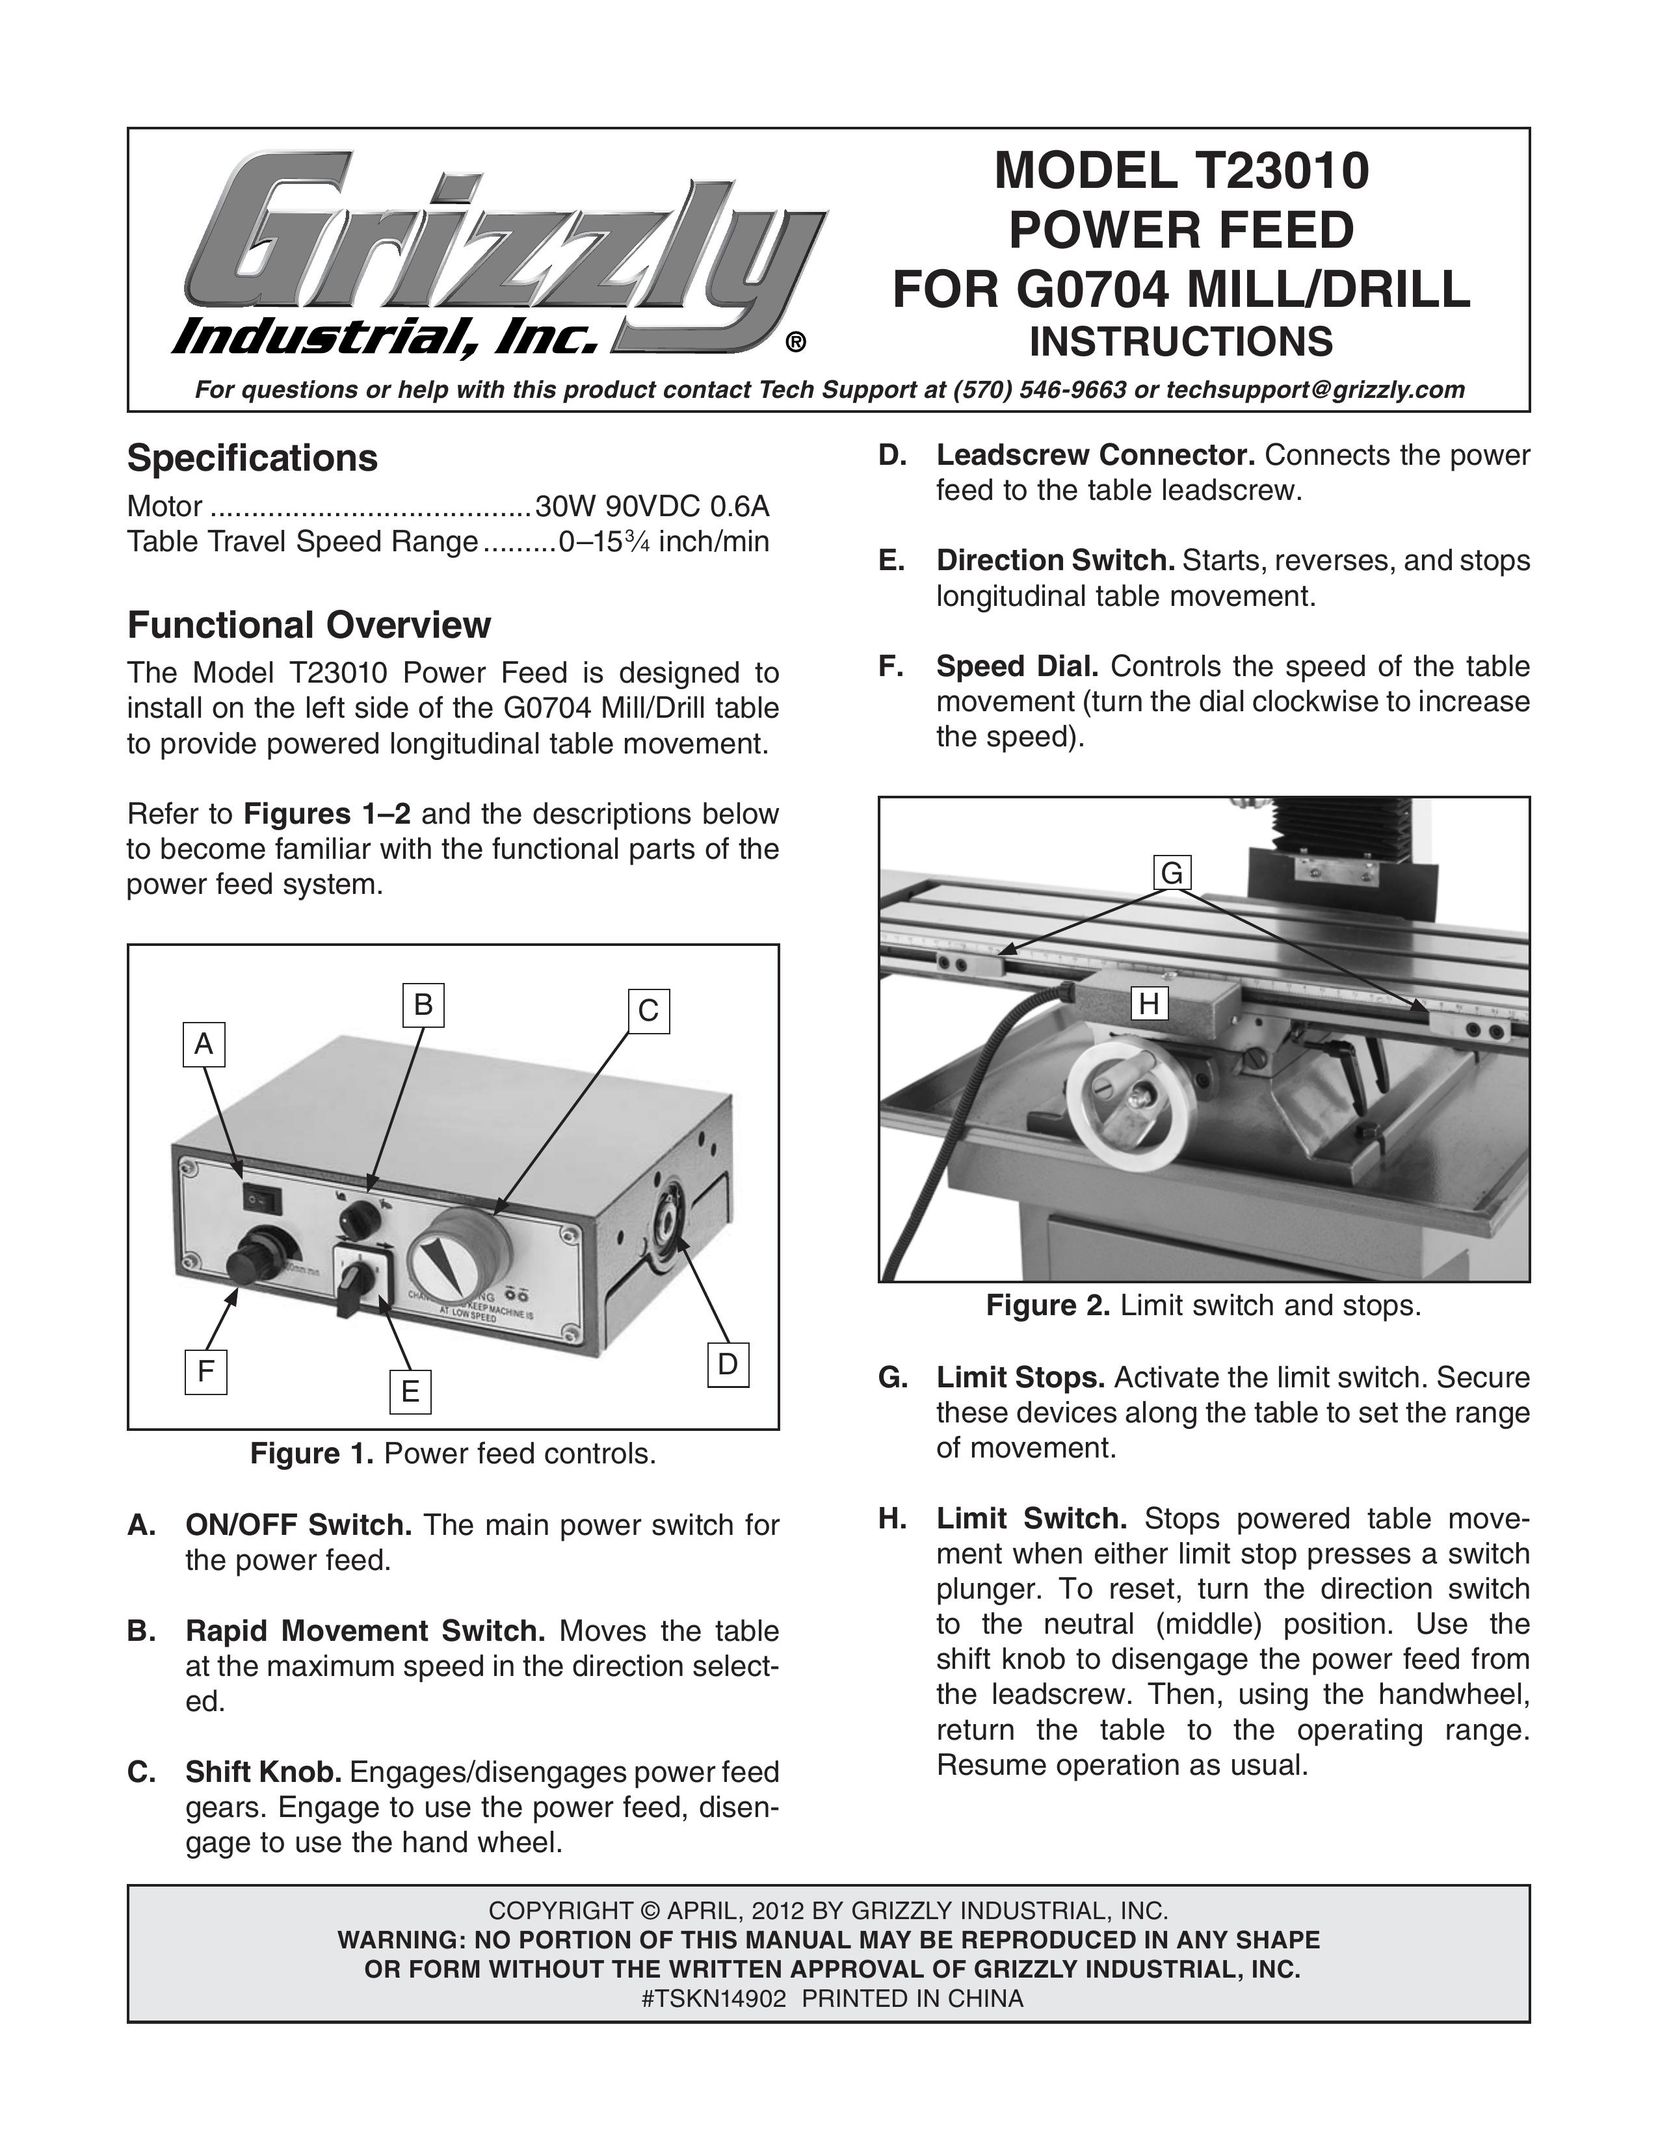 Grizzly T23010 Riding Toy User Manual